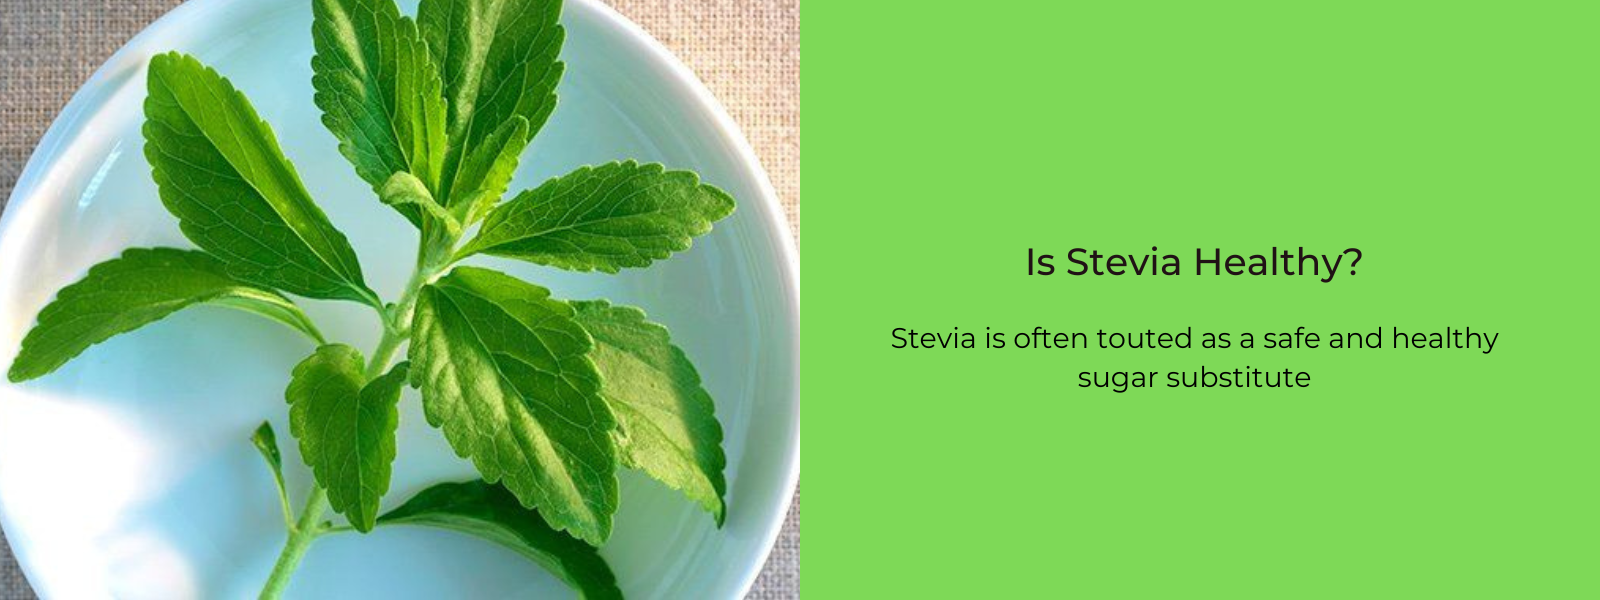 Is Stevia Healthy?